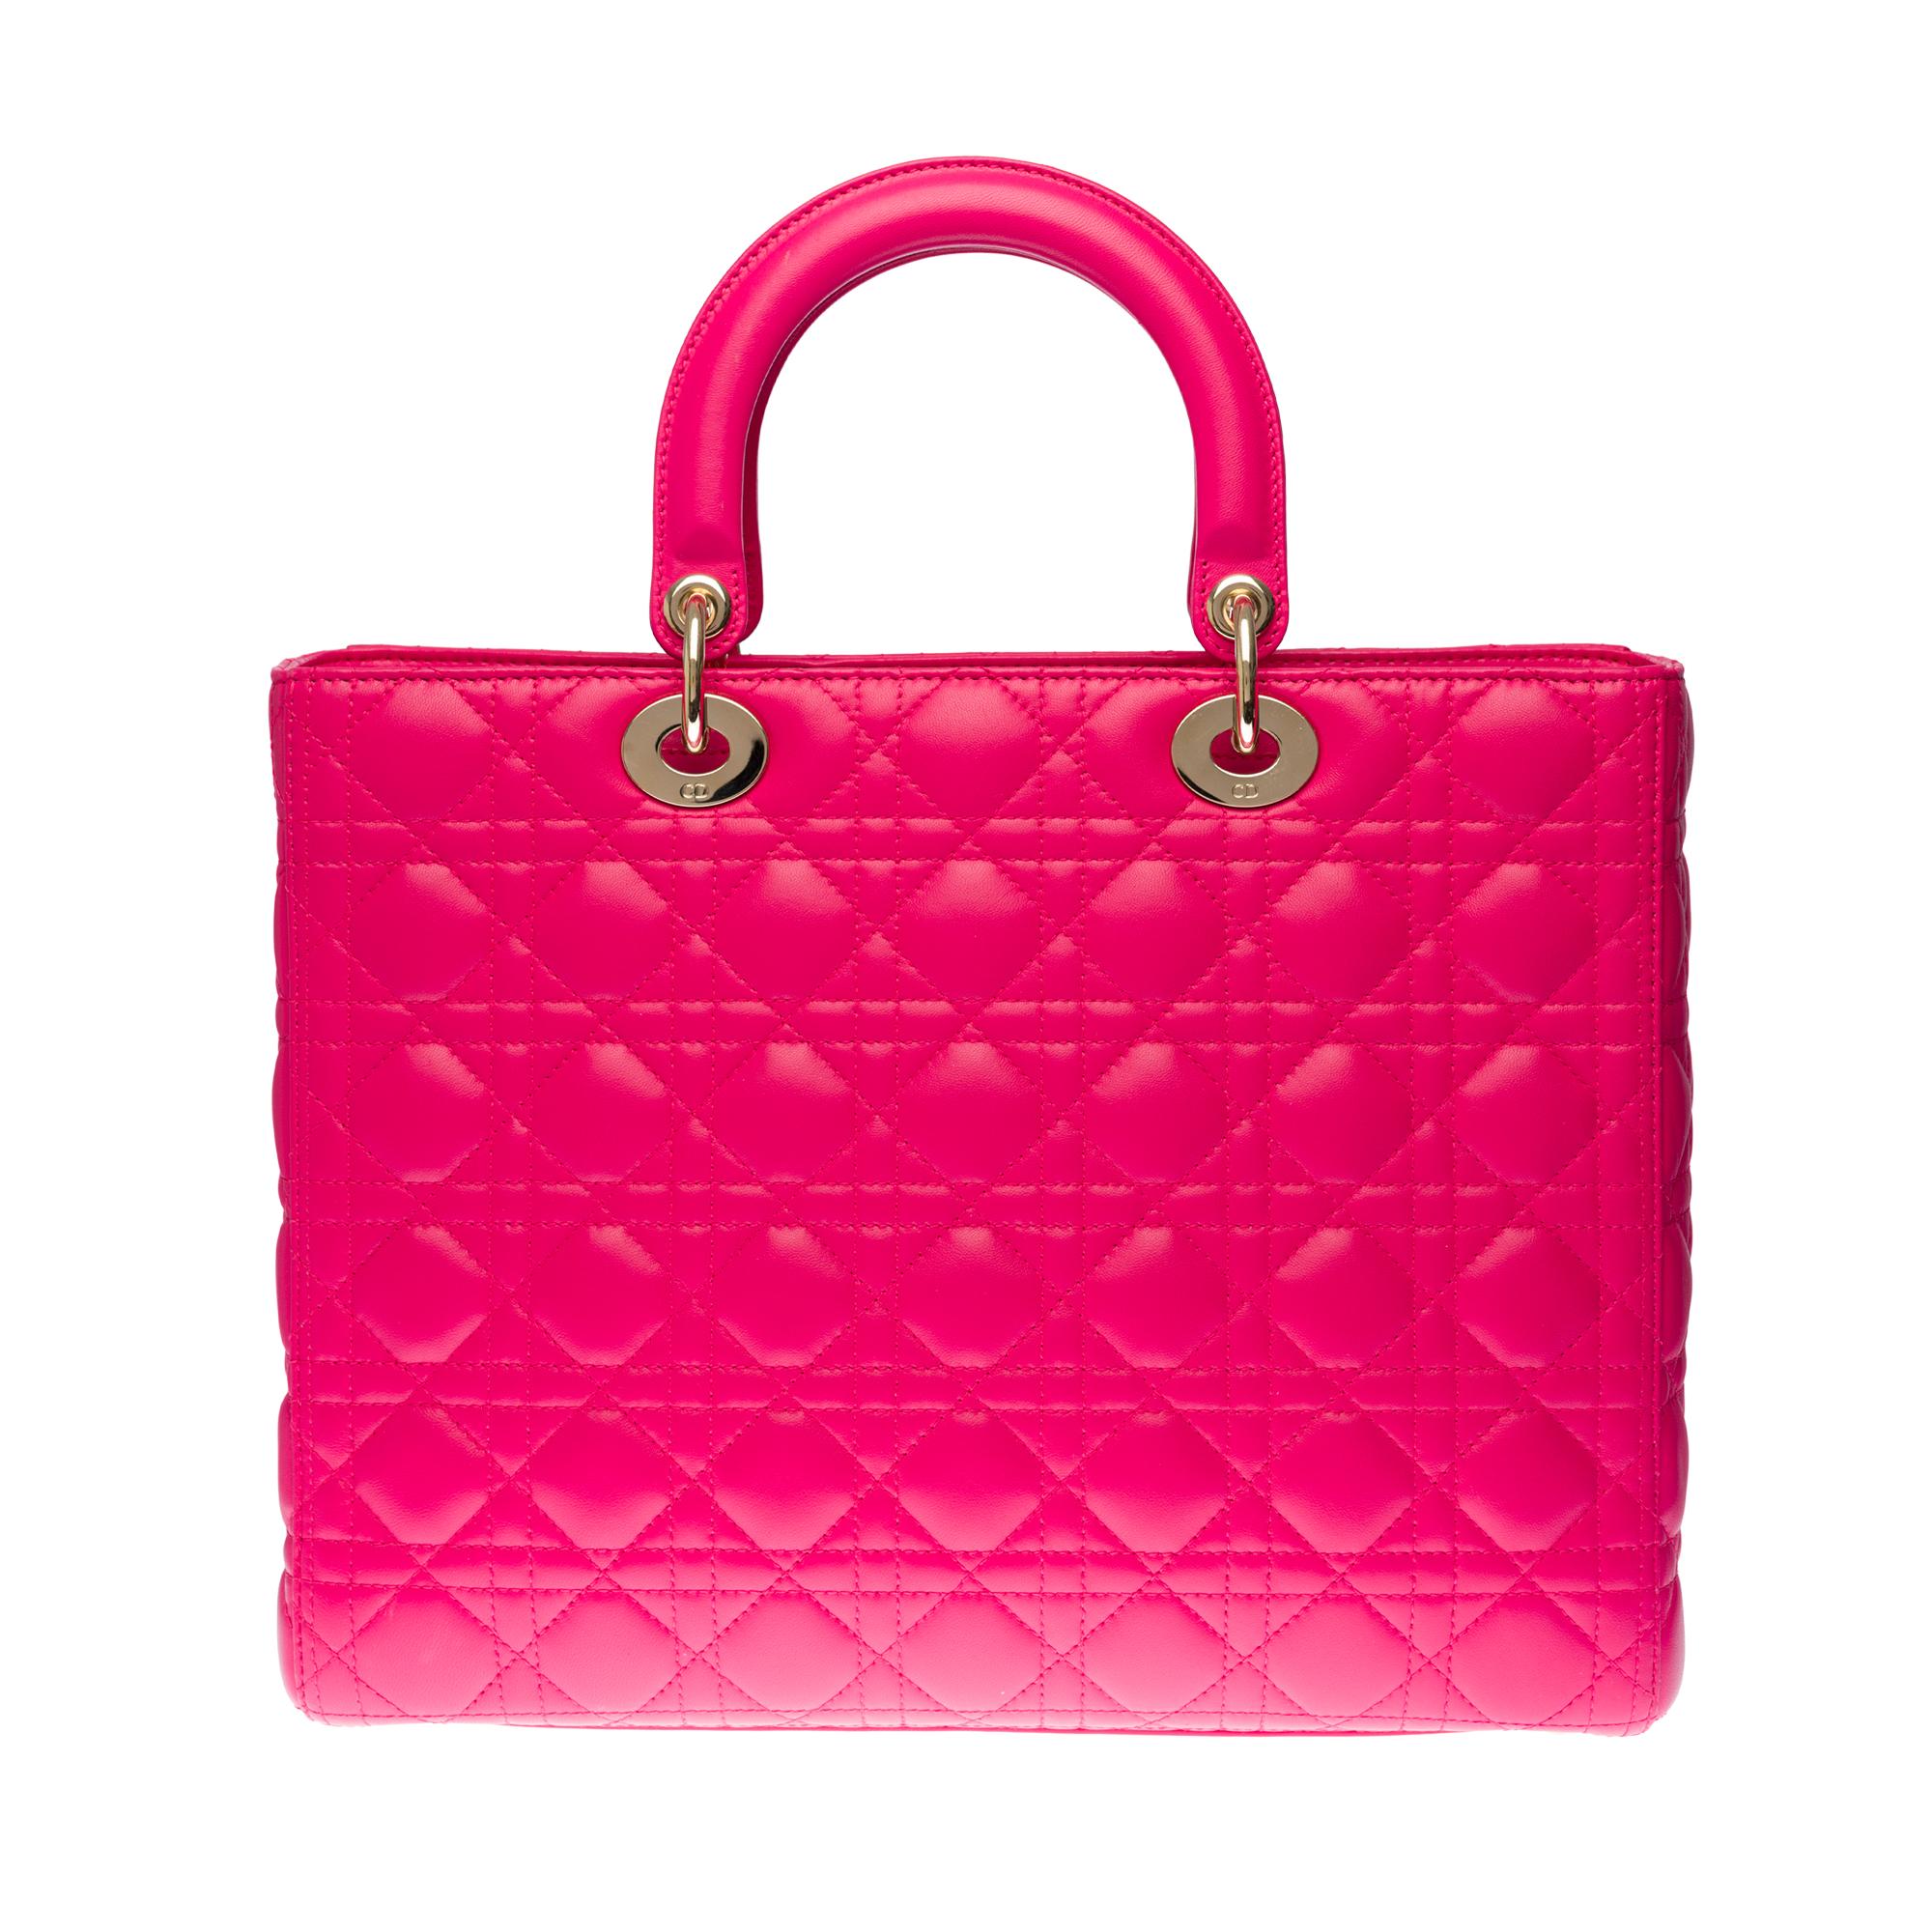 Very chic shoulder bag Christian Dior, Lady Dior large model (GM) in Fuchsia pink leather cannage , silver metal hardware, double handle in pink leather, removable shoulder strap handle in pink leather allowing a hand or shoulder support or shoulder